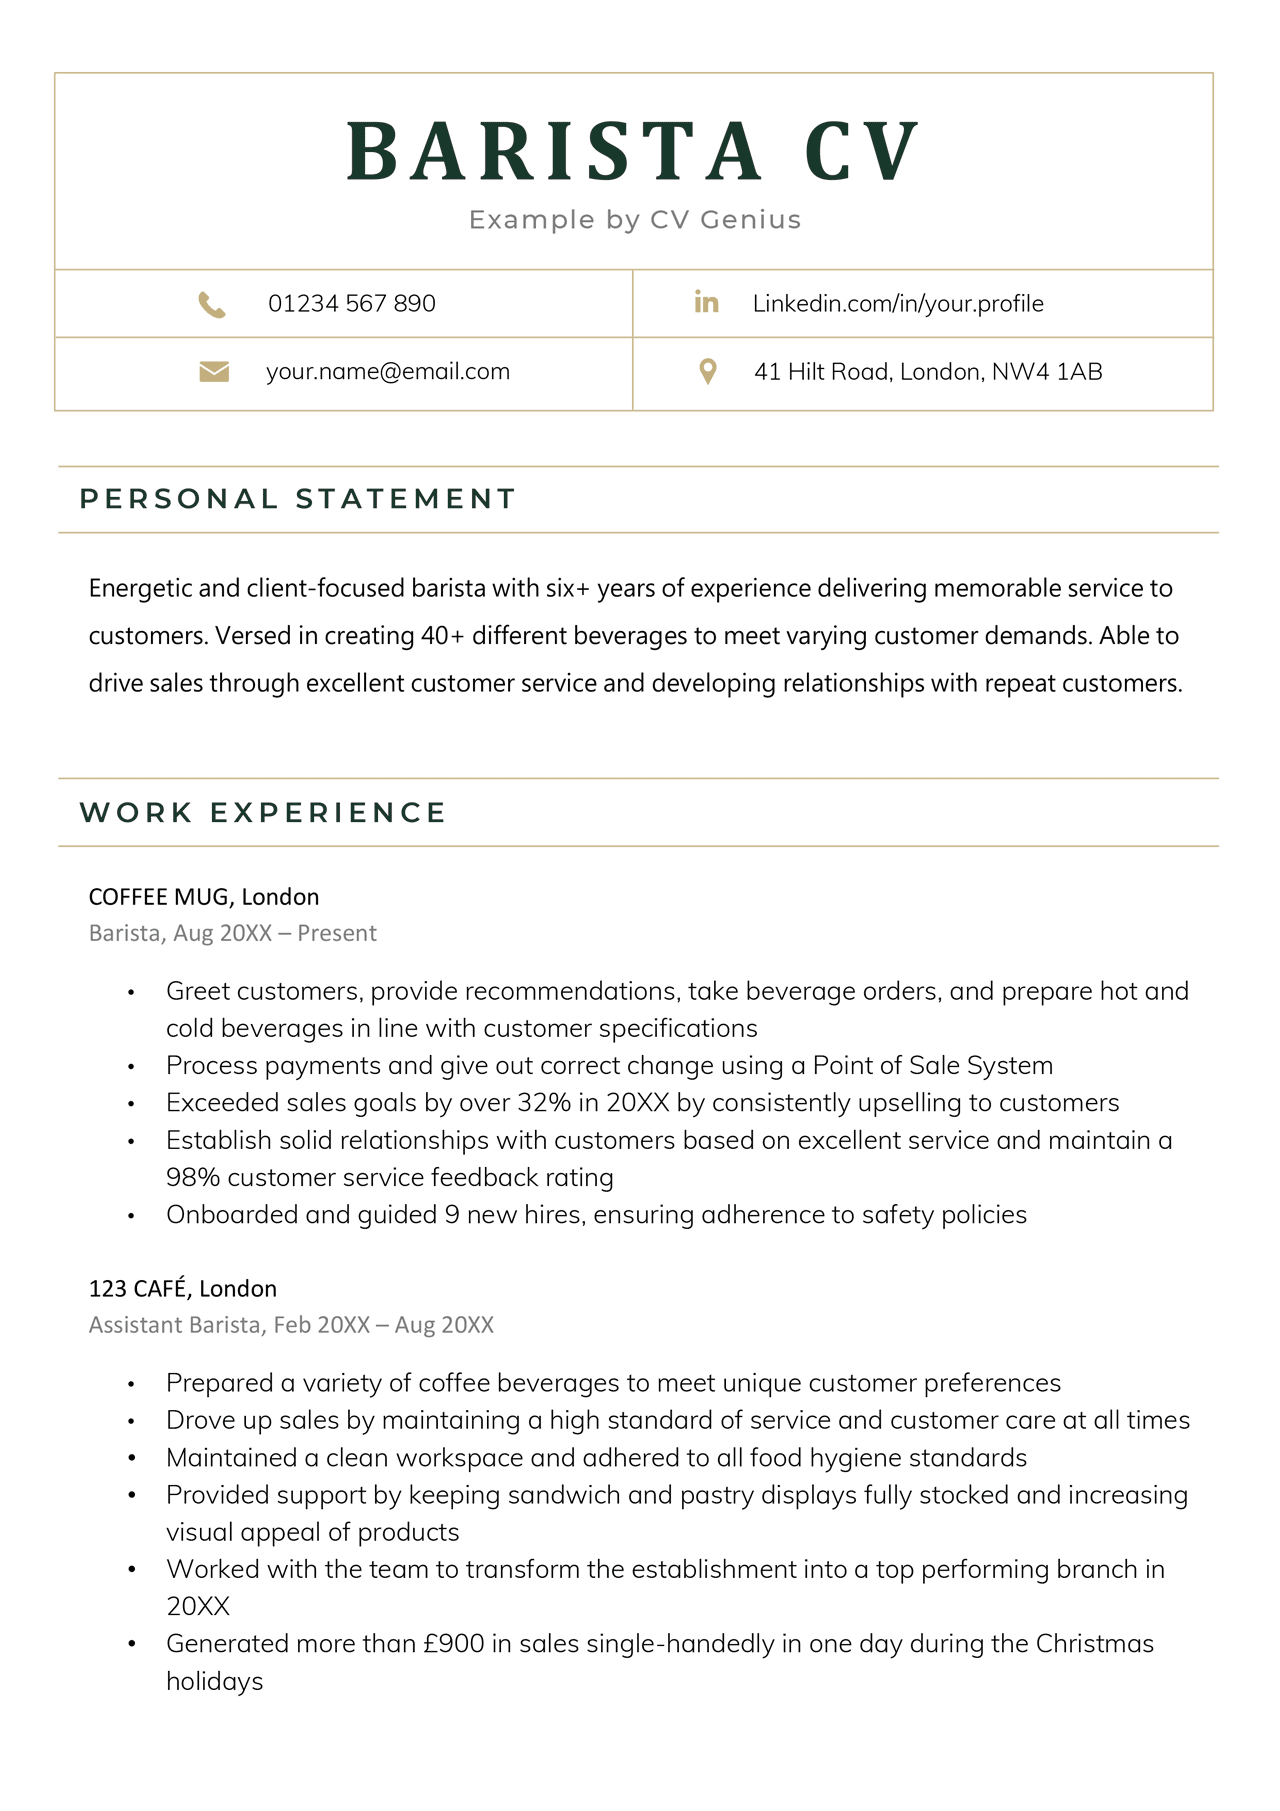 Example of a barista CV in a green-themed template with a 4-cell table for the applicant's contact information in the header.